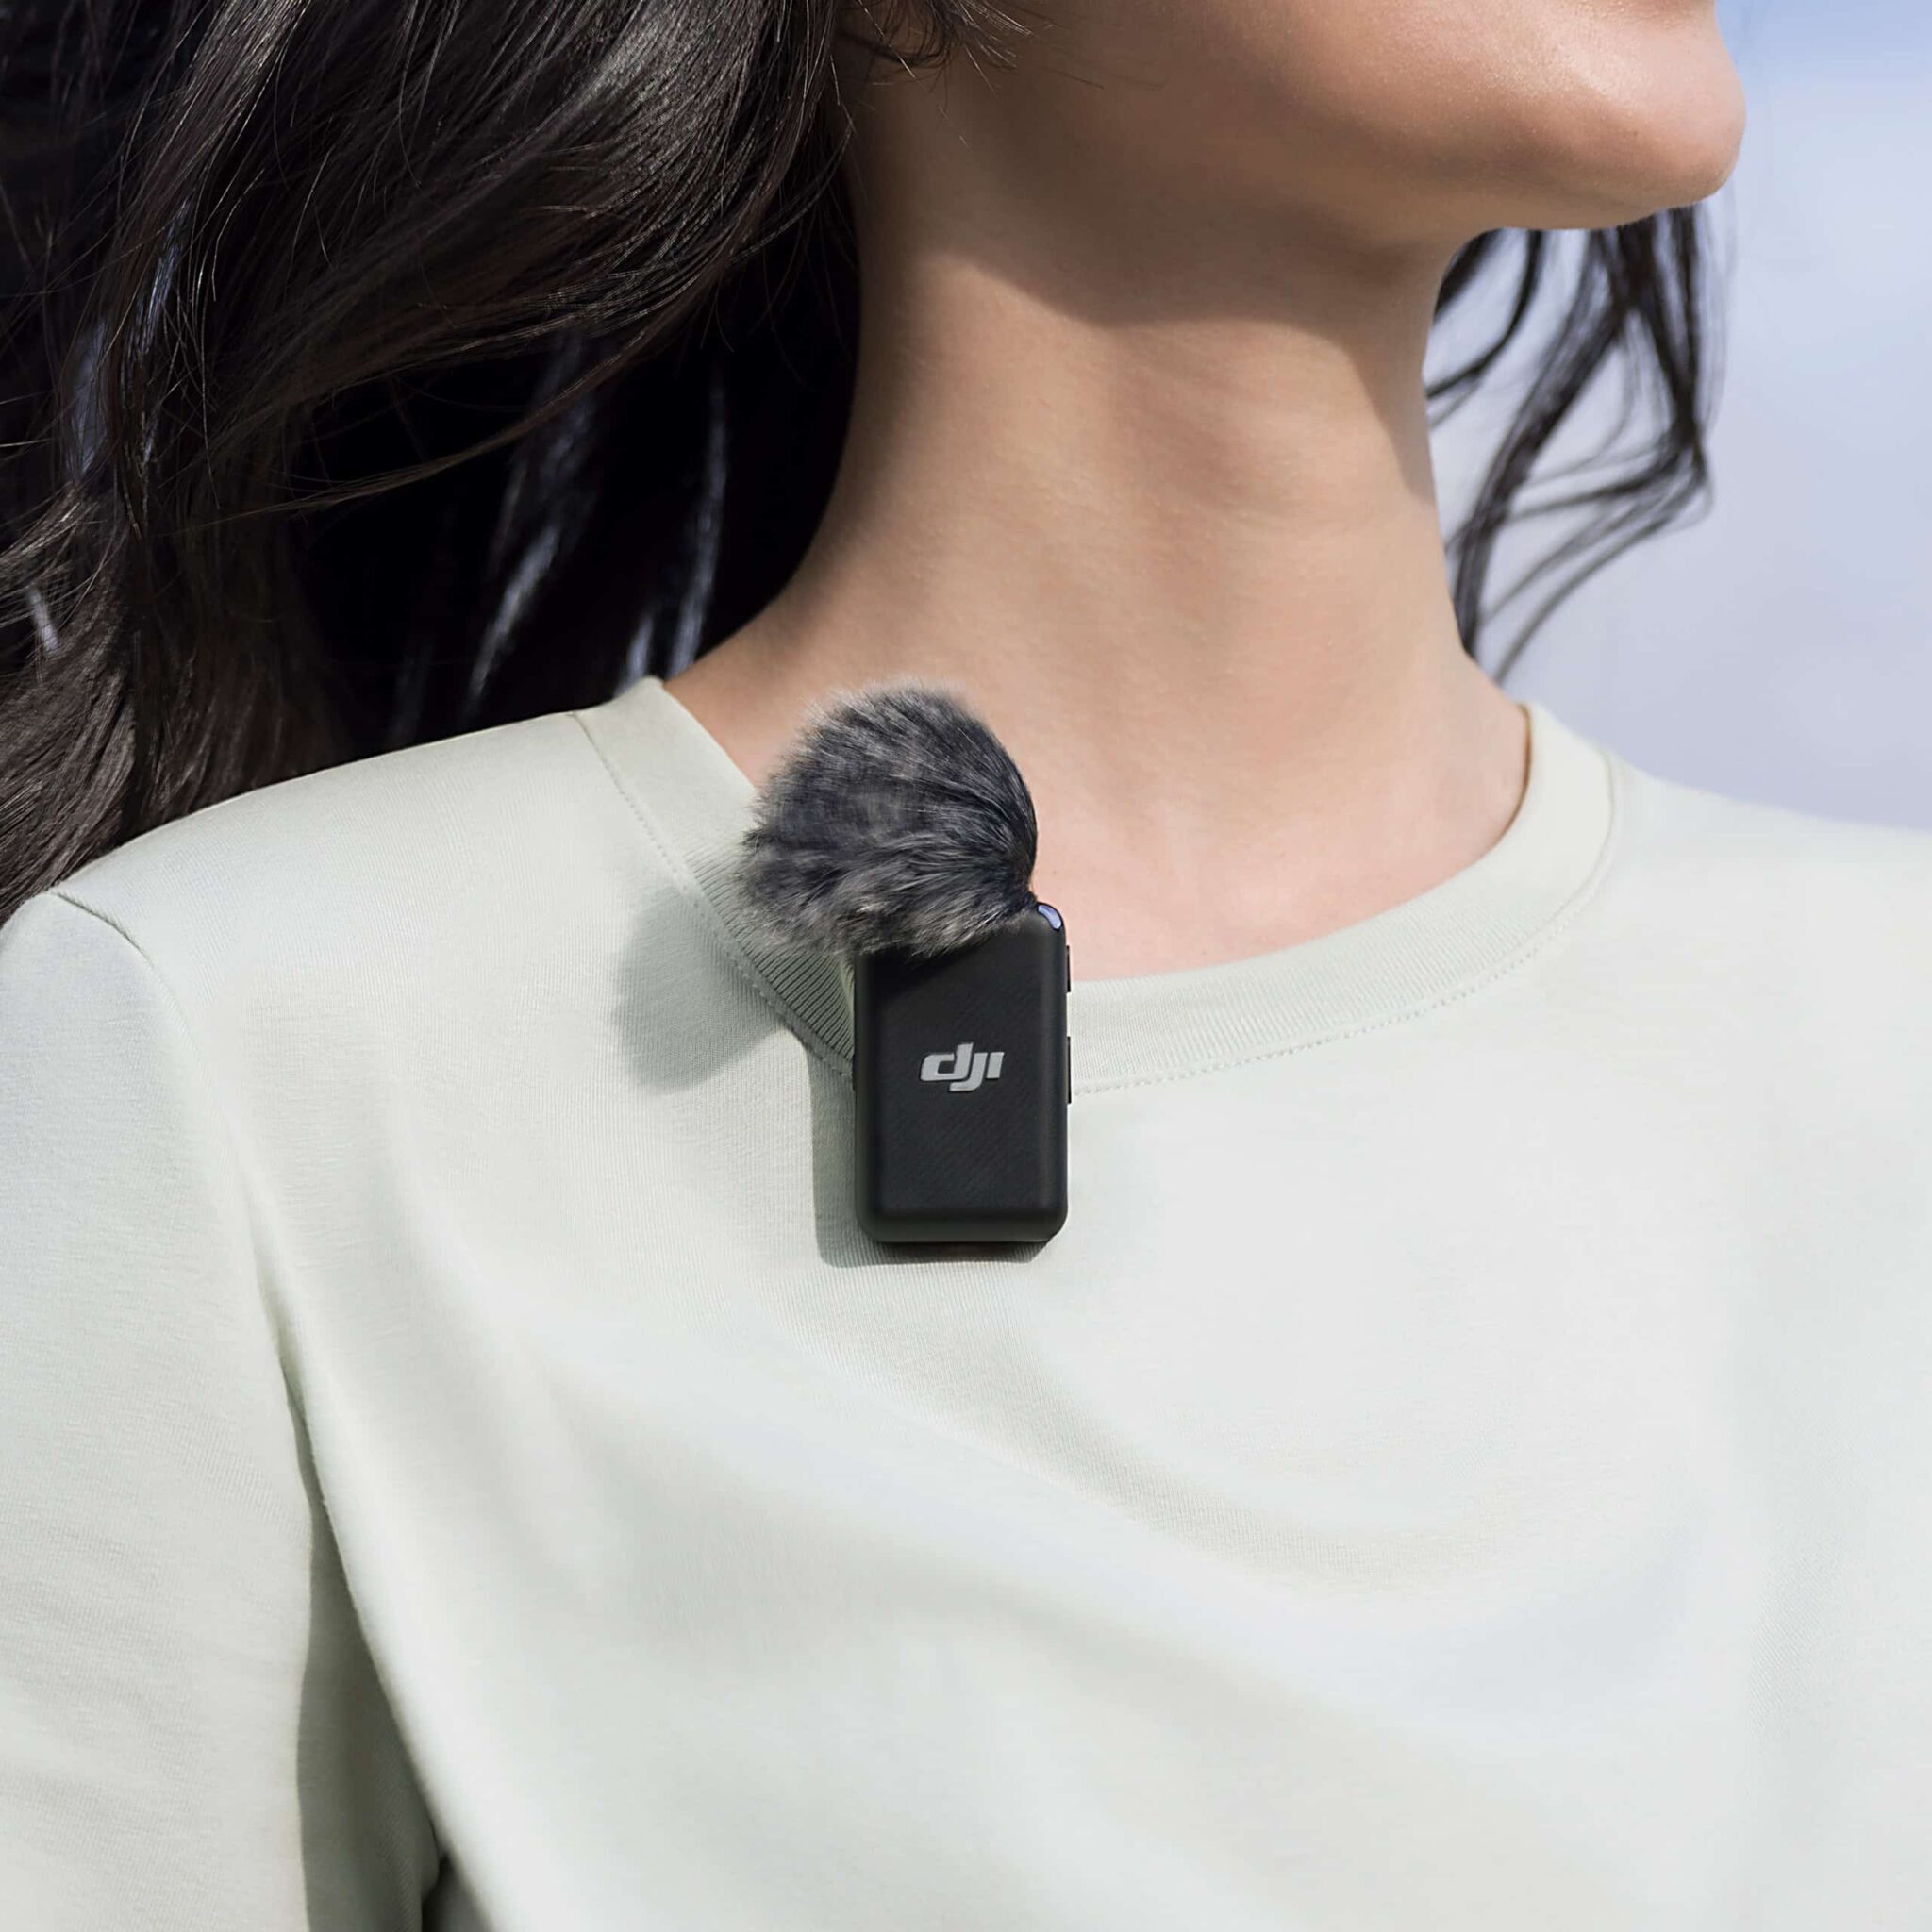 DJI's Mic 2 now records high-quality audio to your smartphone via Bluetooth